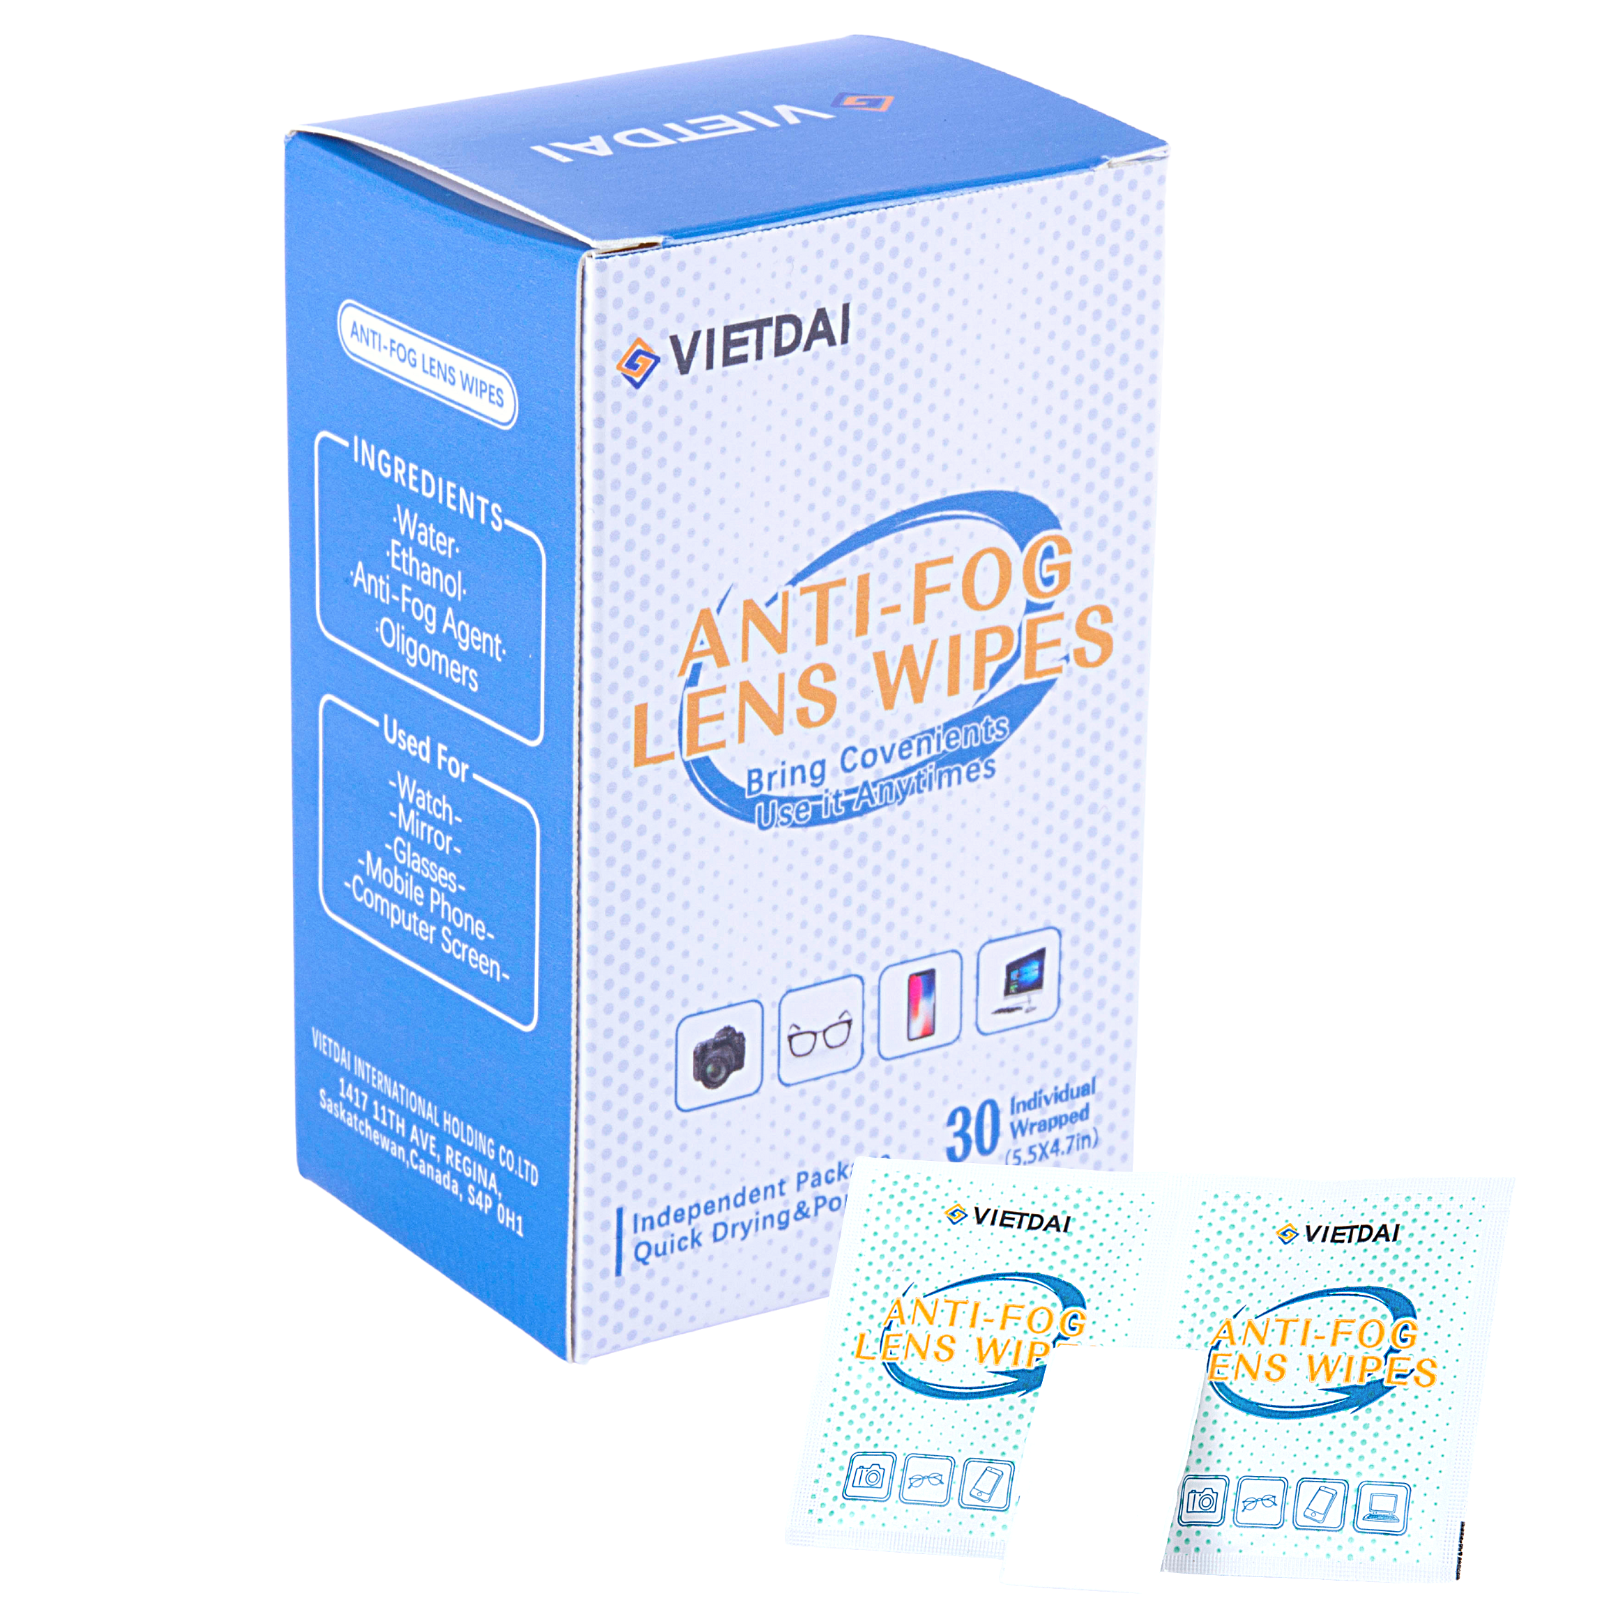 VIETDAI Anti-Fog Lens Wipes - 1 Pack (60 tablets)